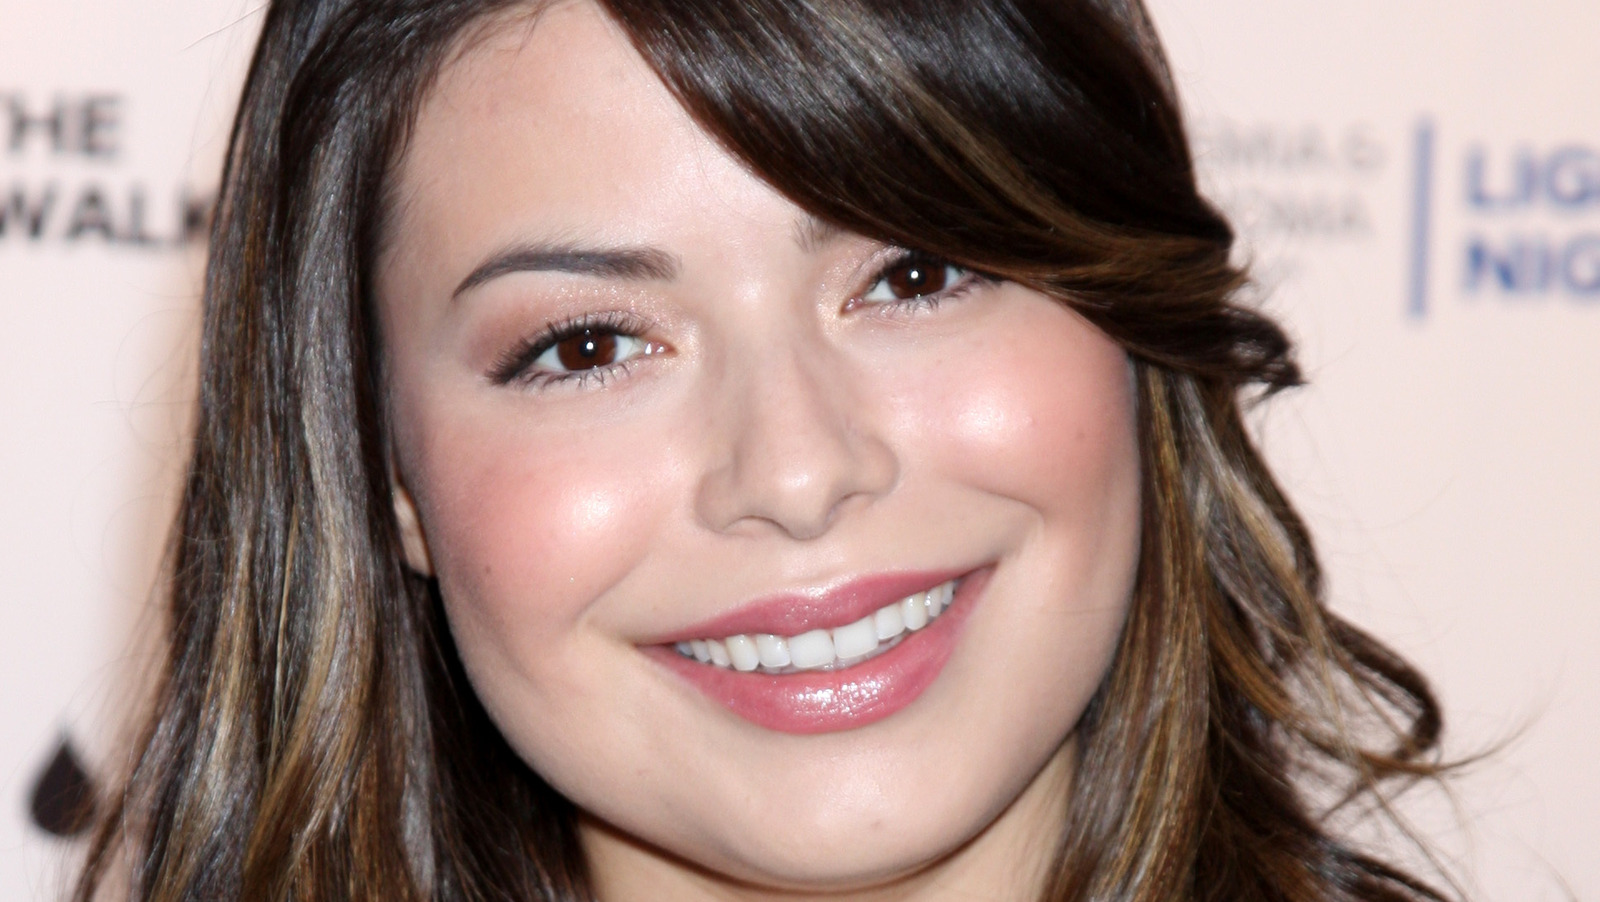 The Truth About Miranda Cosgrove And Nathan Kress' Relationship